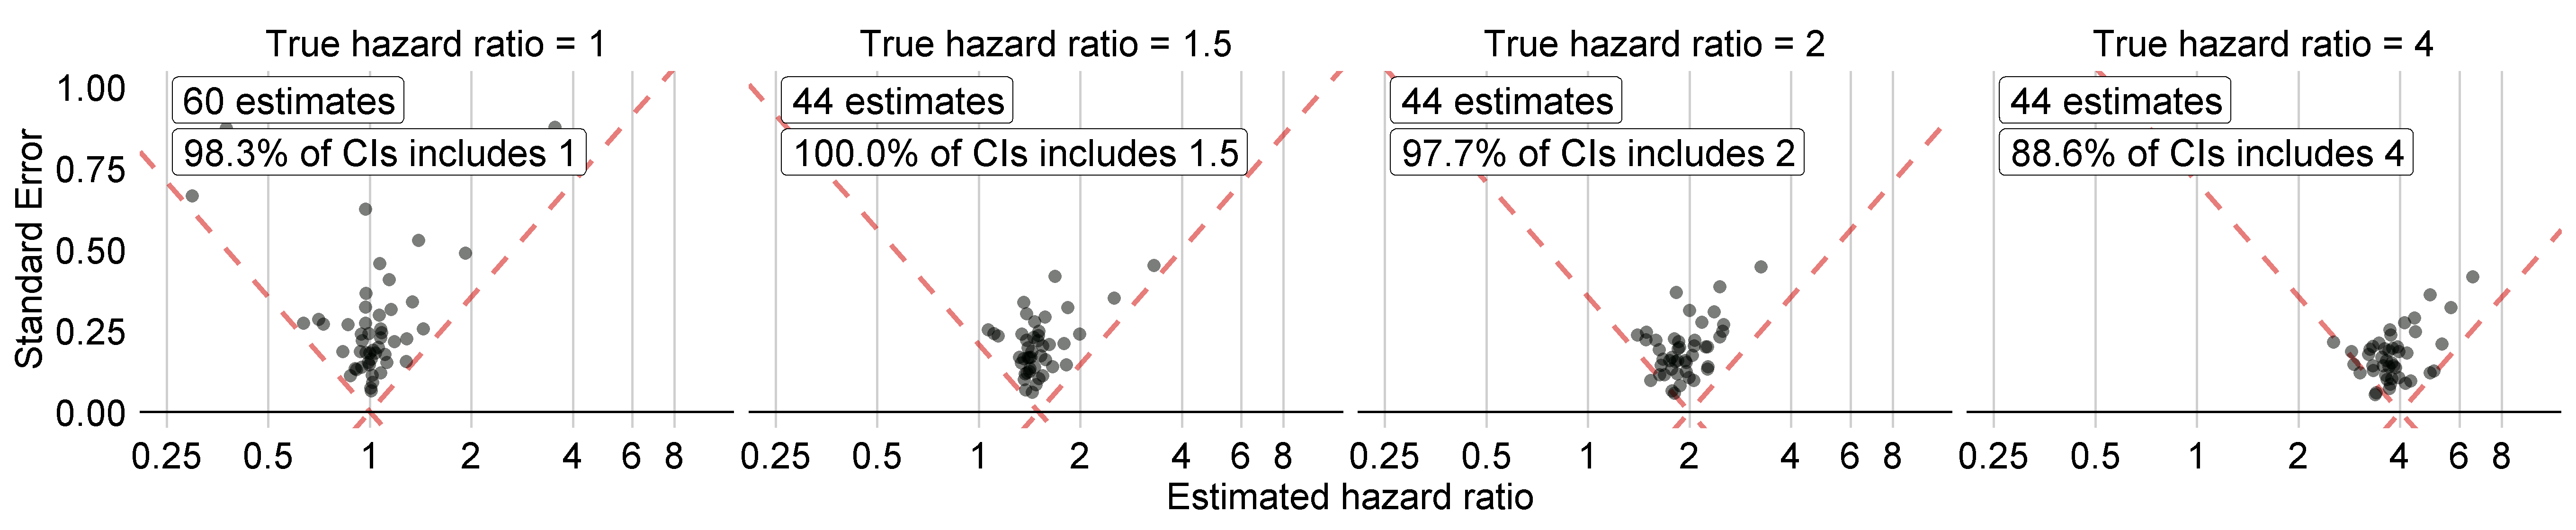 Estimates for the negative (true hazard ratio = 1) and positive controls (true hazard ratio > 1). Each dot represents a control. Estimates below the dashed line have a confidence interval that doesn't include the true effect size.